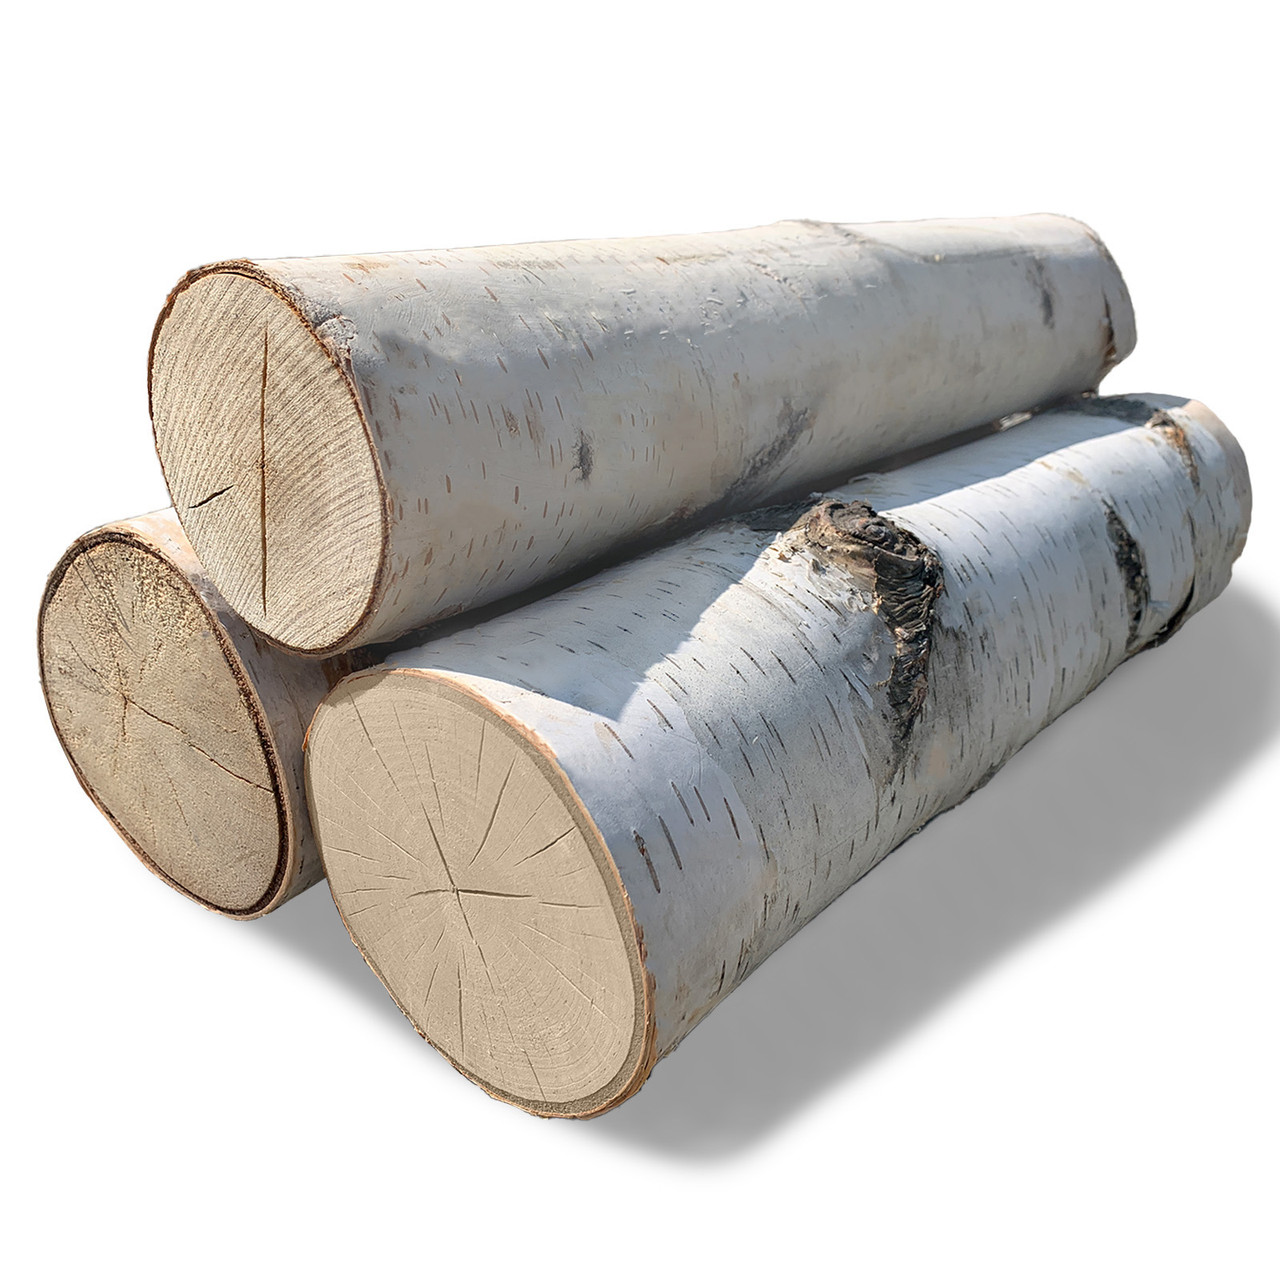 Wilson Decorative White Birch Logs, Natural Bark Wood Home Décor (Set of  12) - 17-18 in Length 1-1.5 Dia.